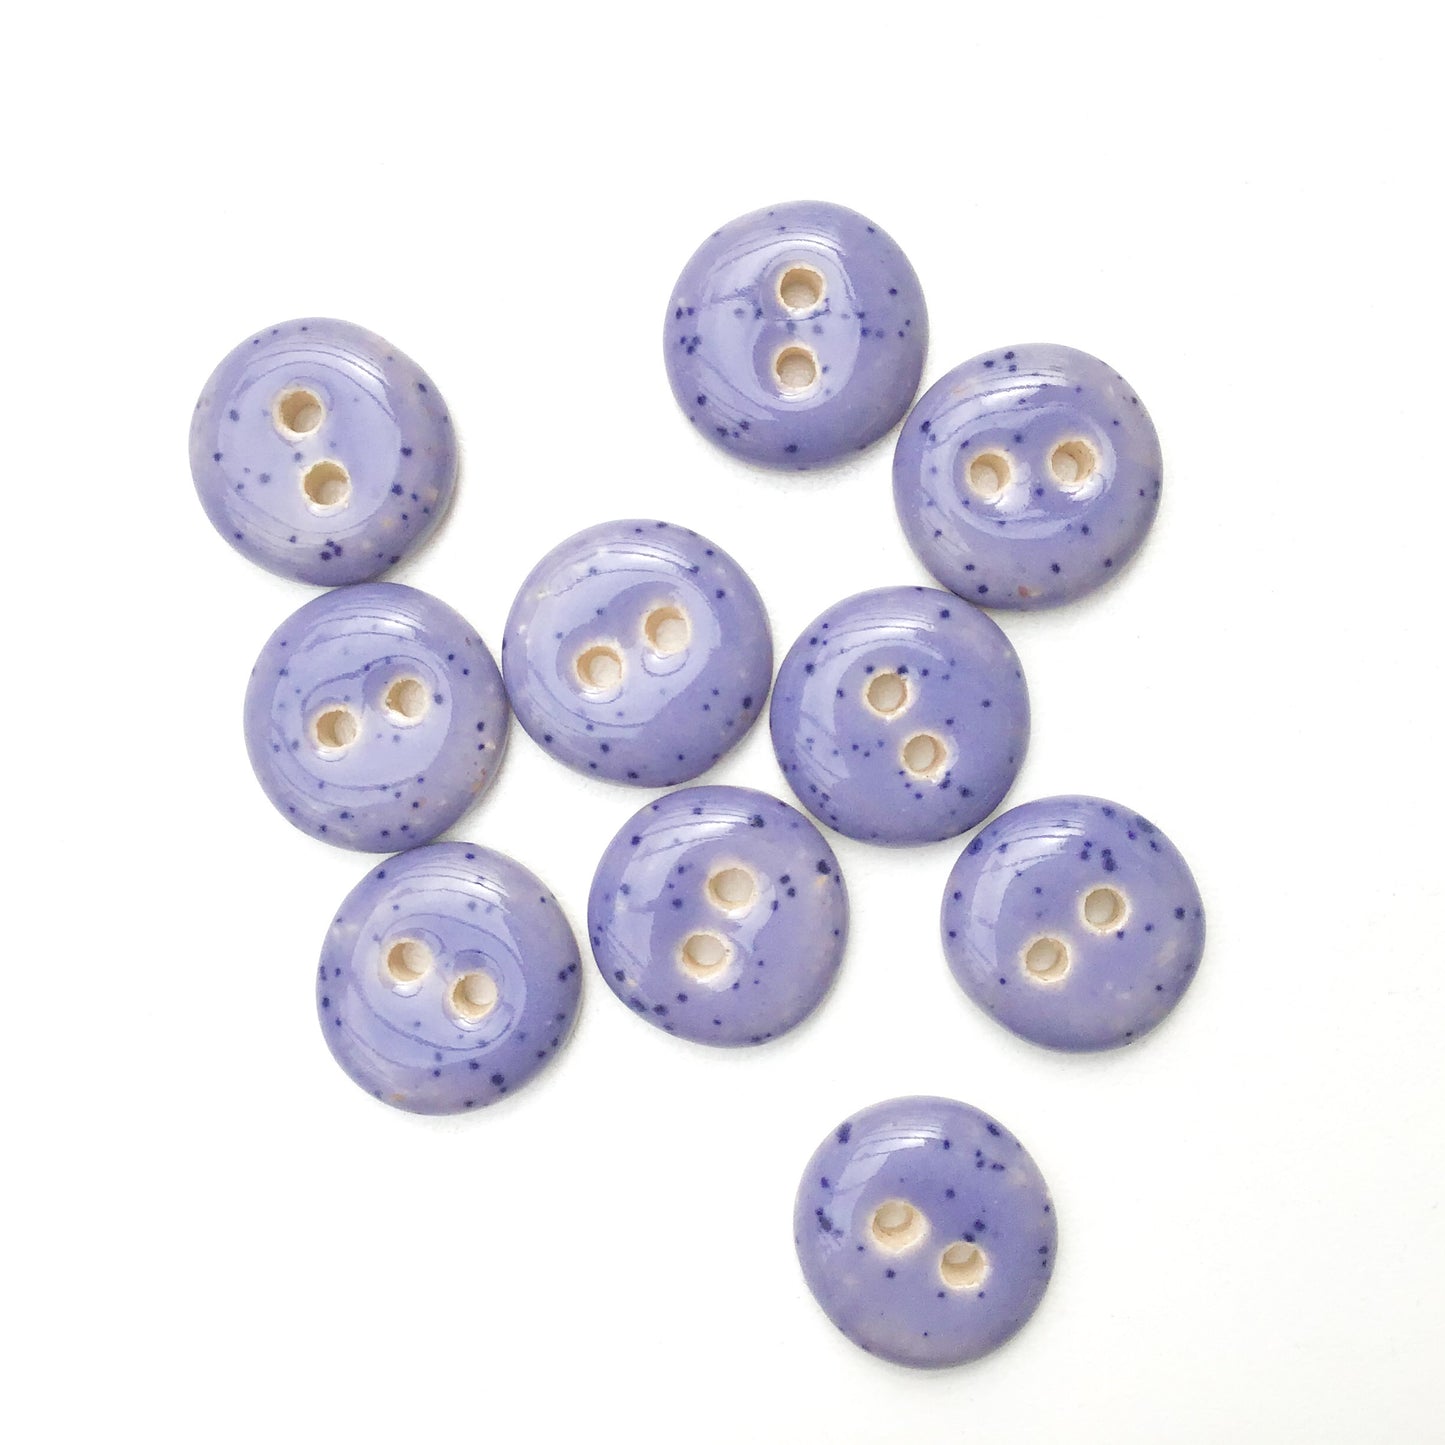 Speckled Purple Ceramic Buttons - Purple Clay Buttons - 9/16" - 10 Pack